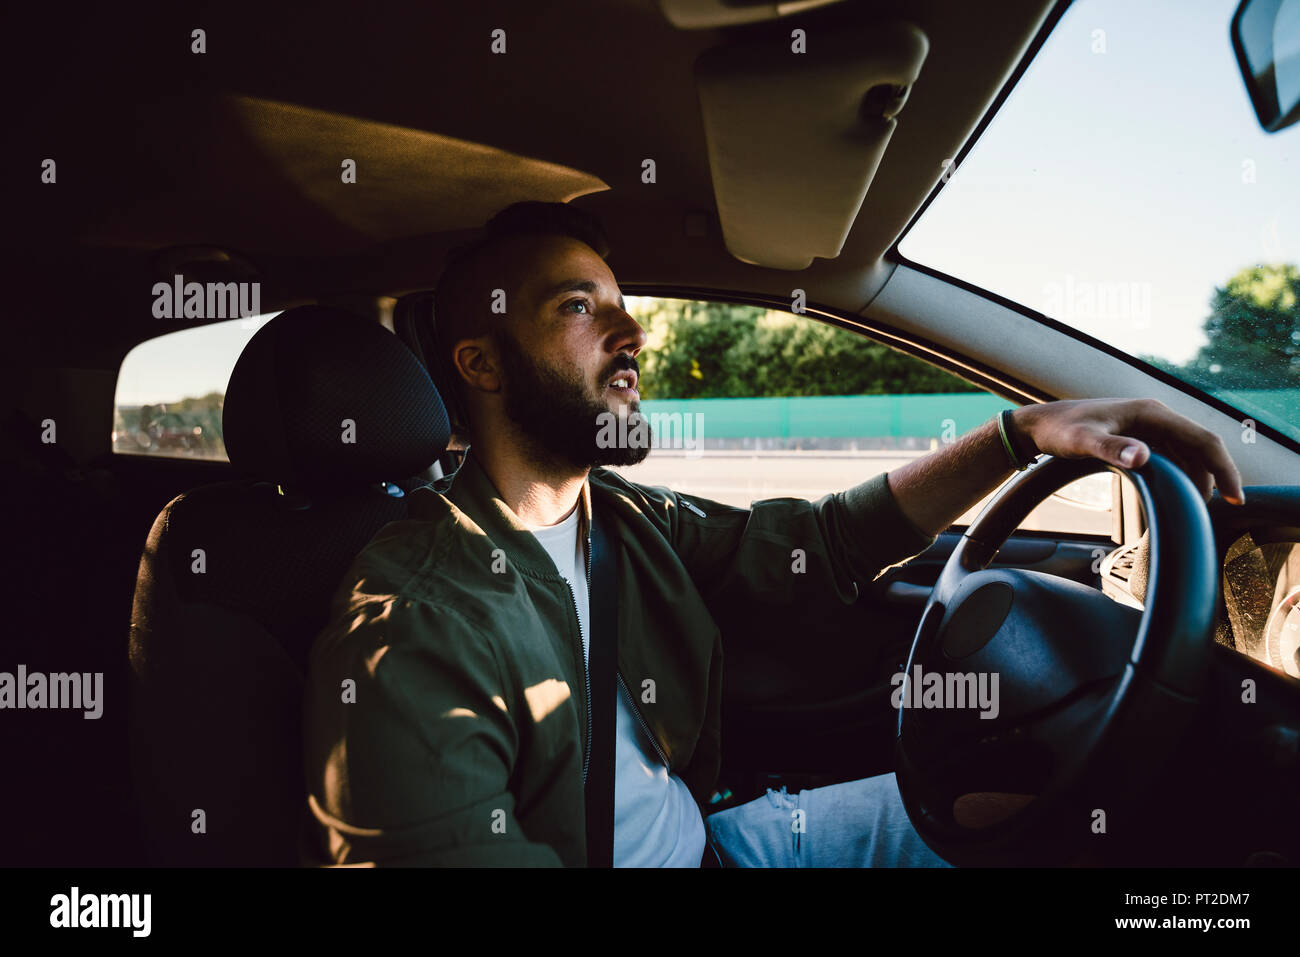 Bearded young man looking at rear-view mirror while driving car Stock Photo